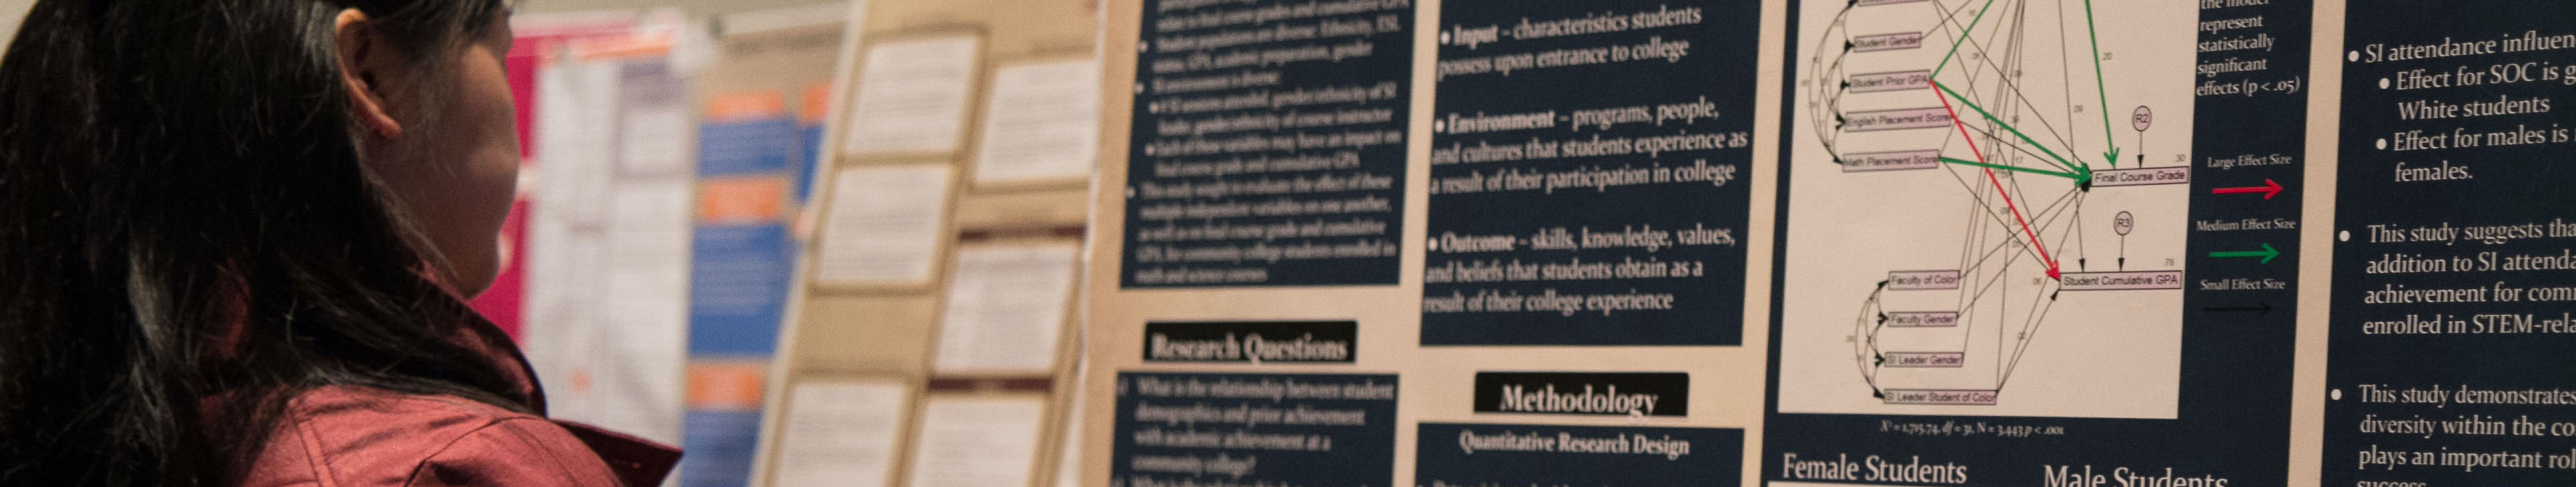 woman looking at c-real poster at research symposium